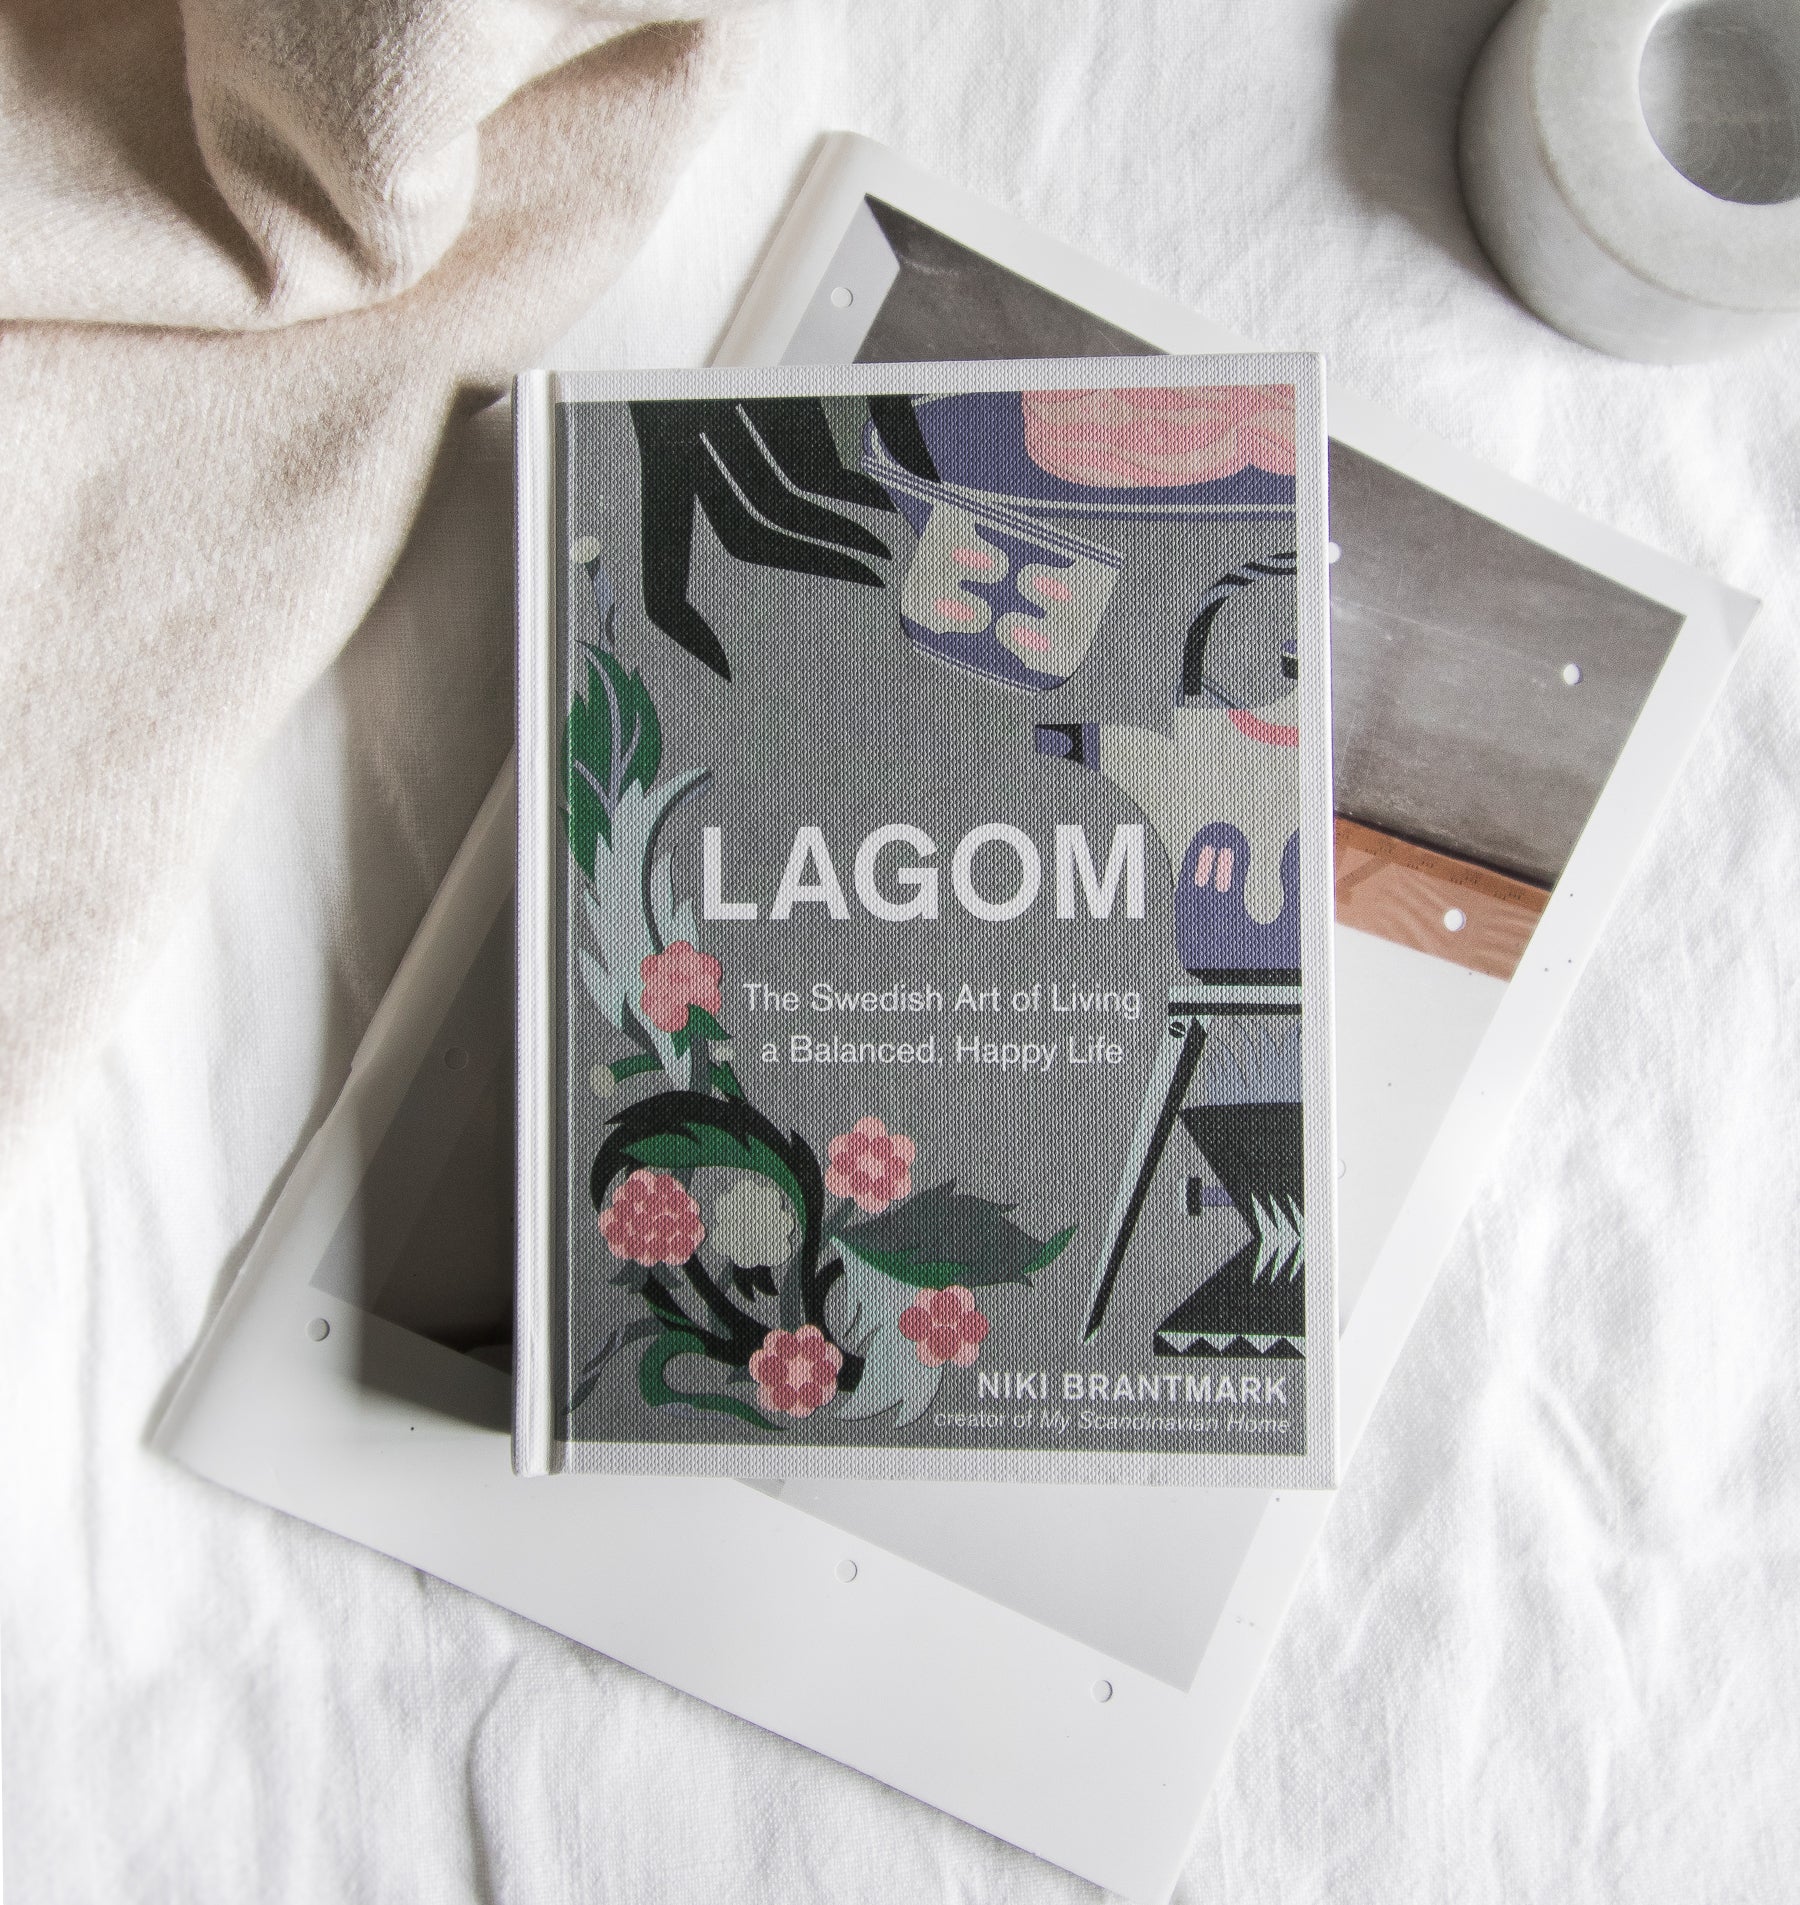 WHAT IS LAGOM? THE LIFESTYLE TREND WE ALL NEED RIGHT NOW